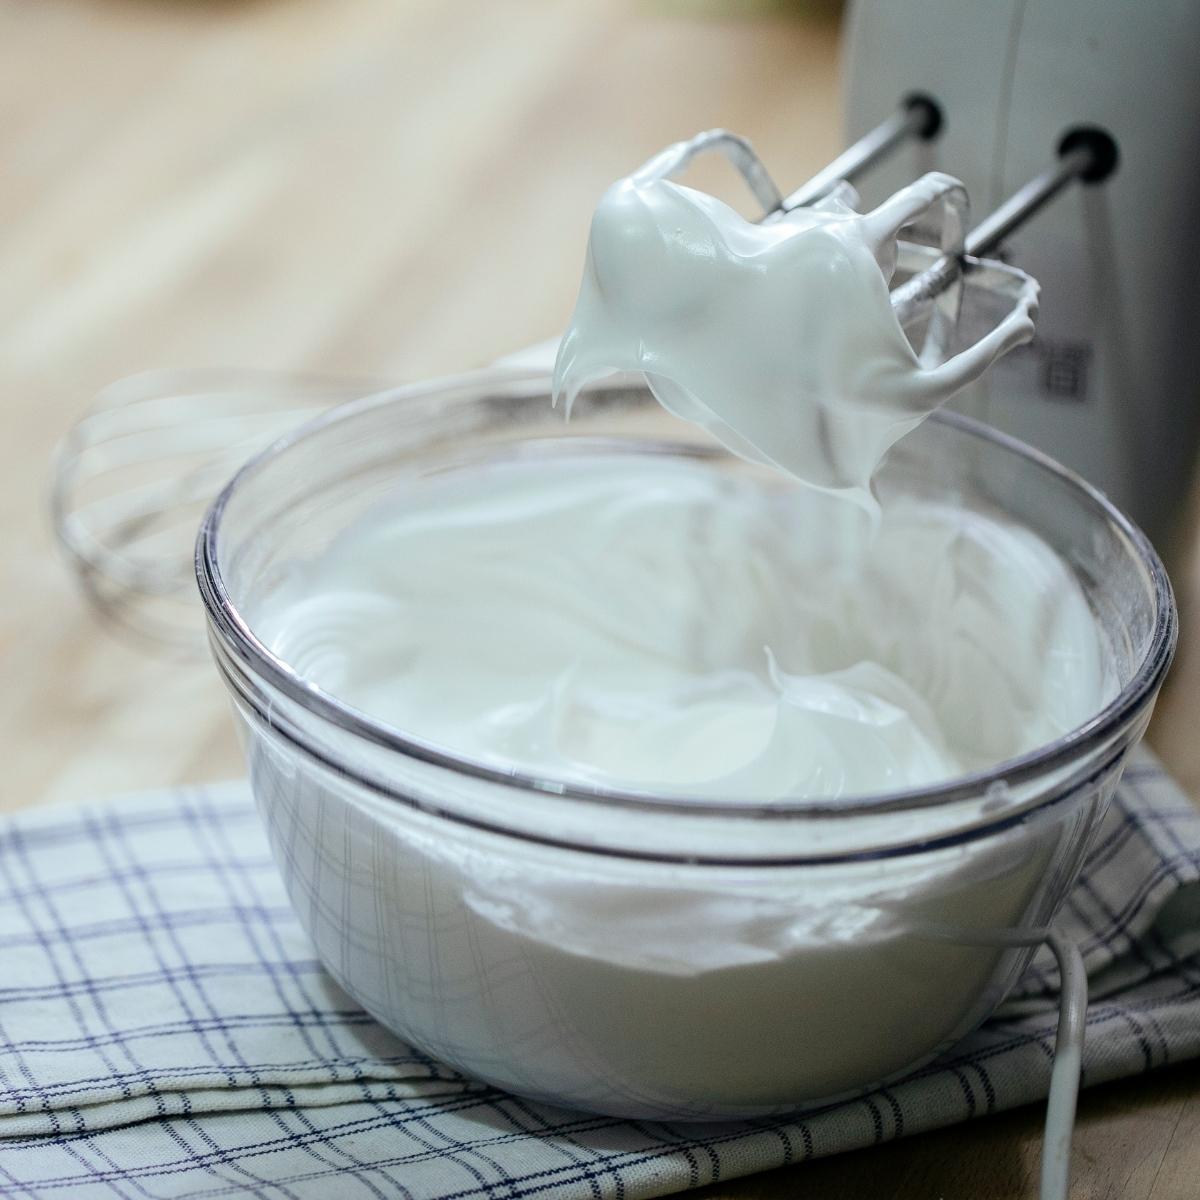 Obscure Facts About the Whipped Cream You Probably Didn’t Know About